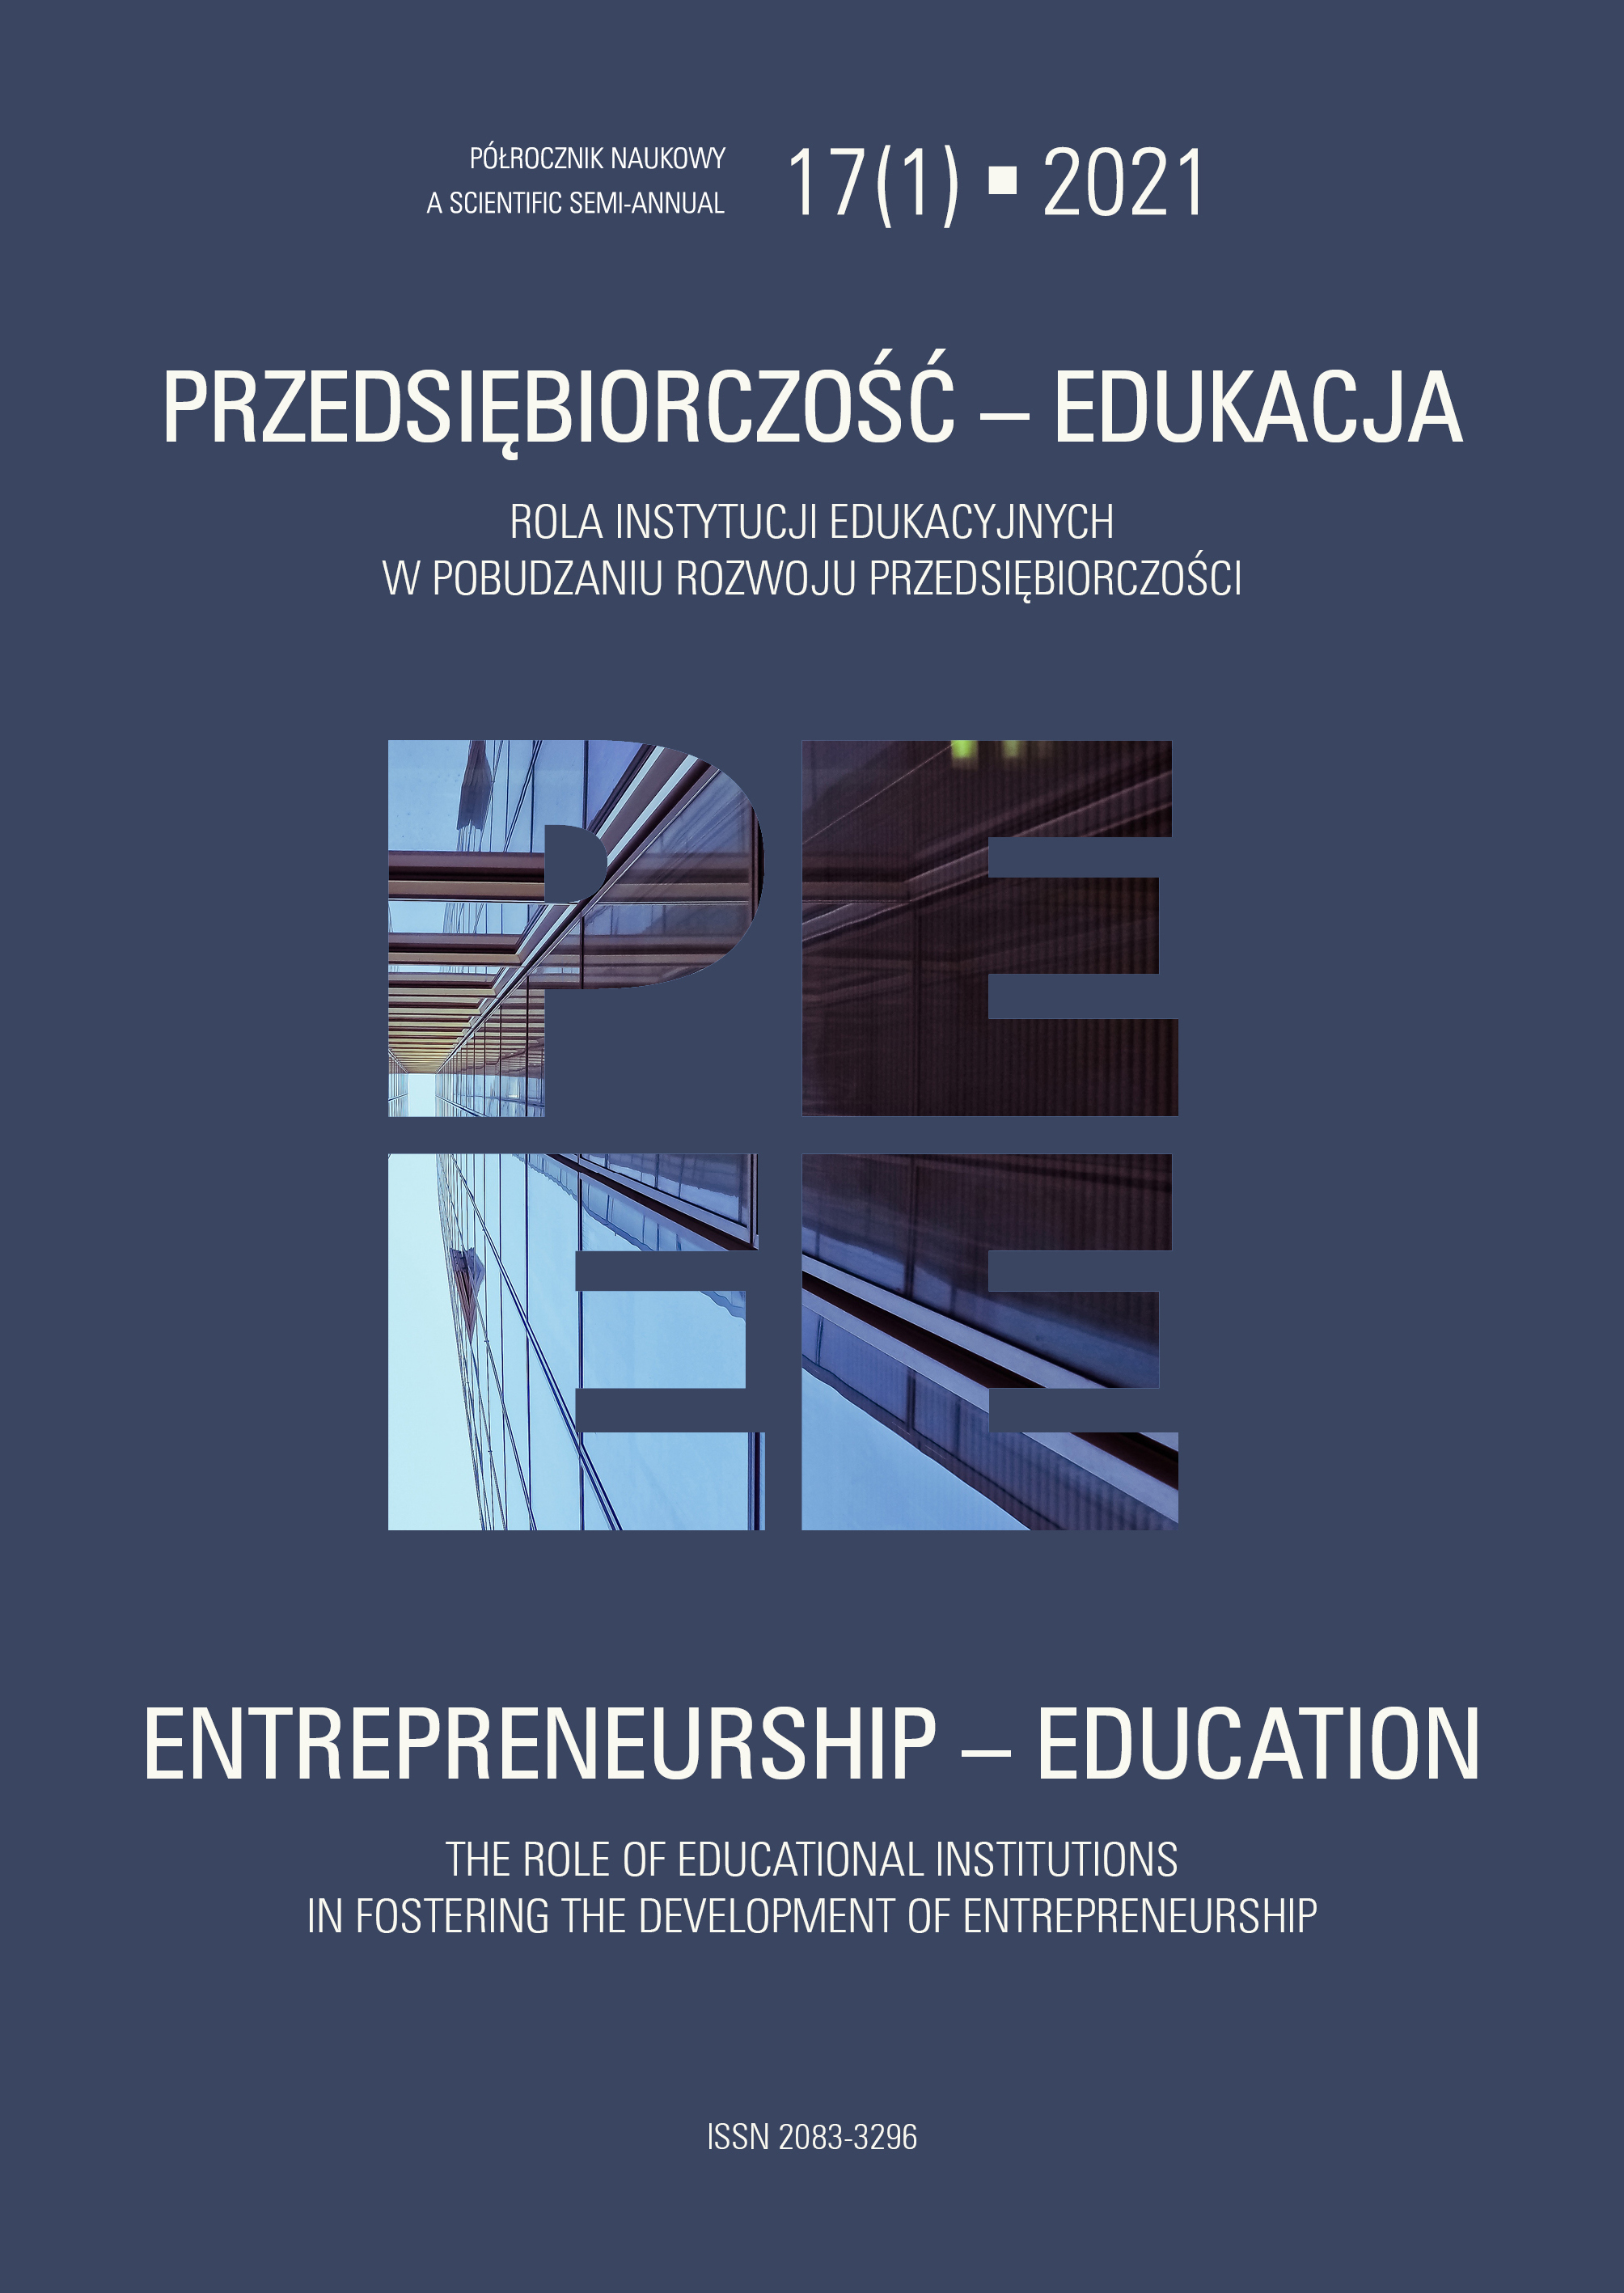 					View Vol. 17 No. 1 (2021): The role of educational institutions in fostering the development of entrepreneurship
				